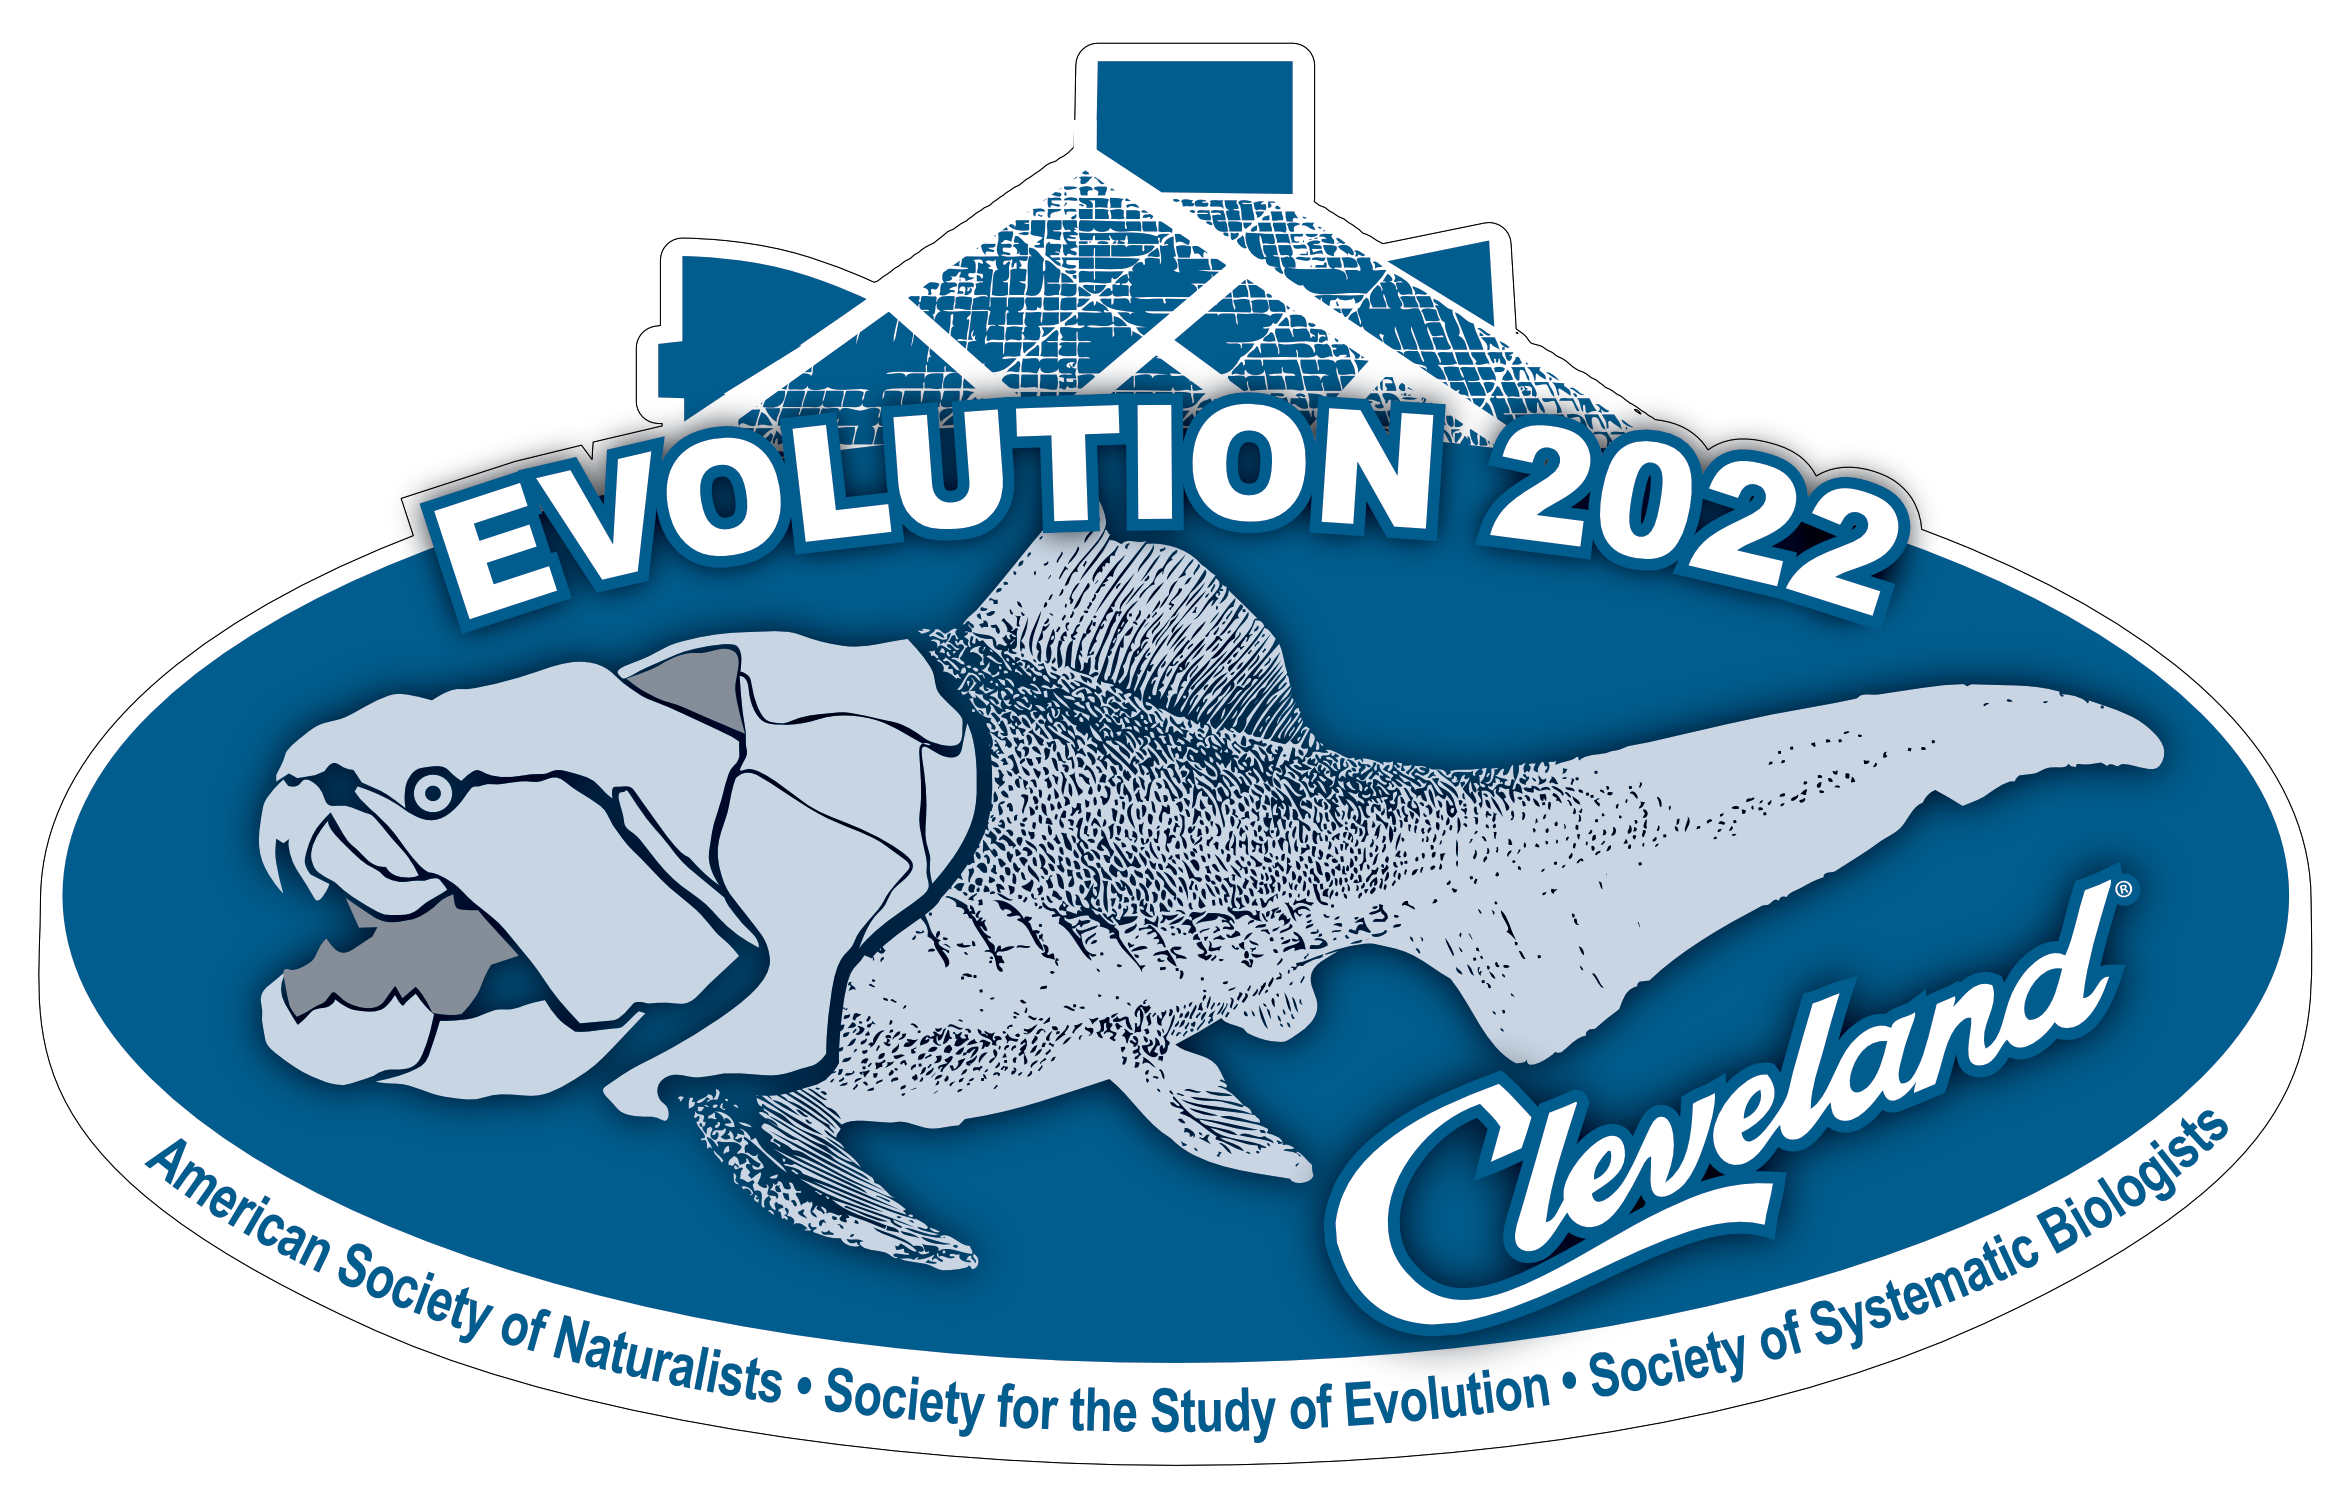 The Evolution 2022 meeting logo. The words Evolution 2022 in white across a blue oval showing a fish fossil and the word Cleveland.